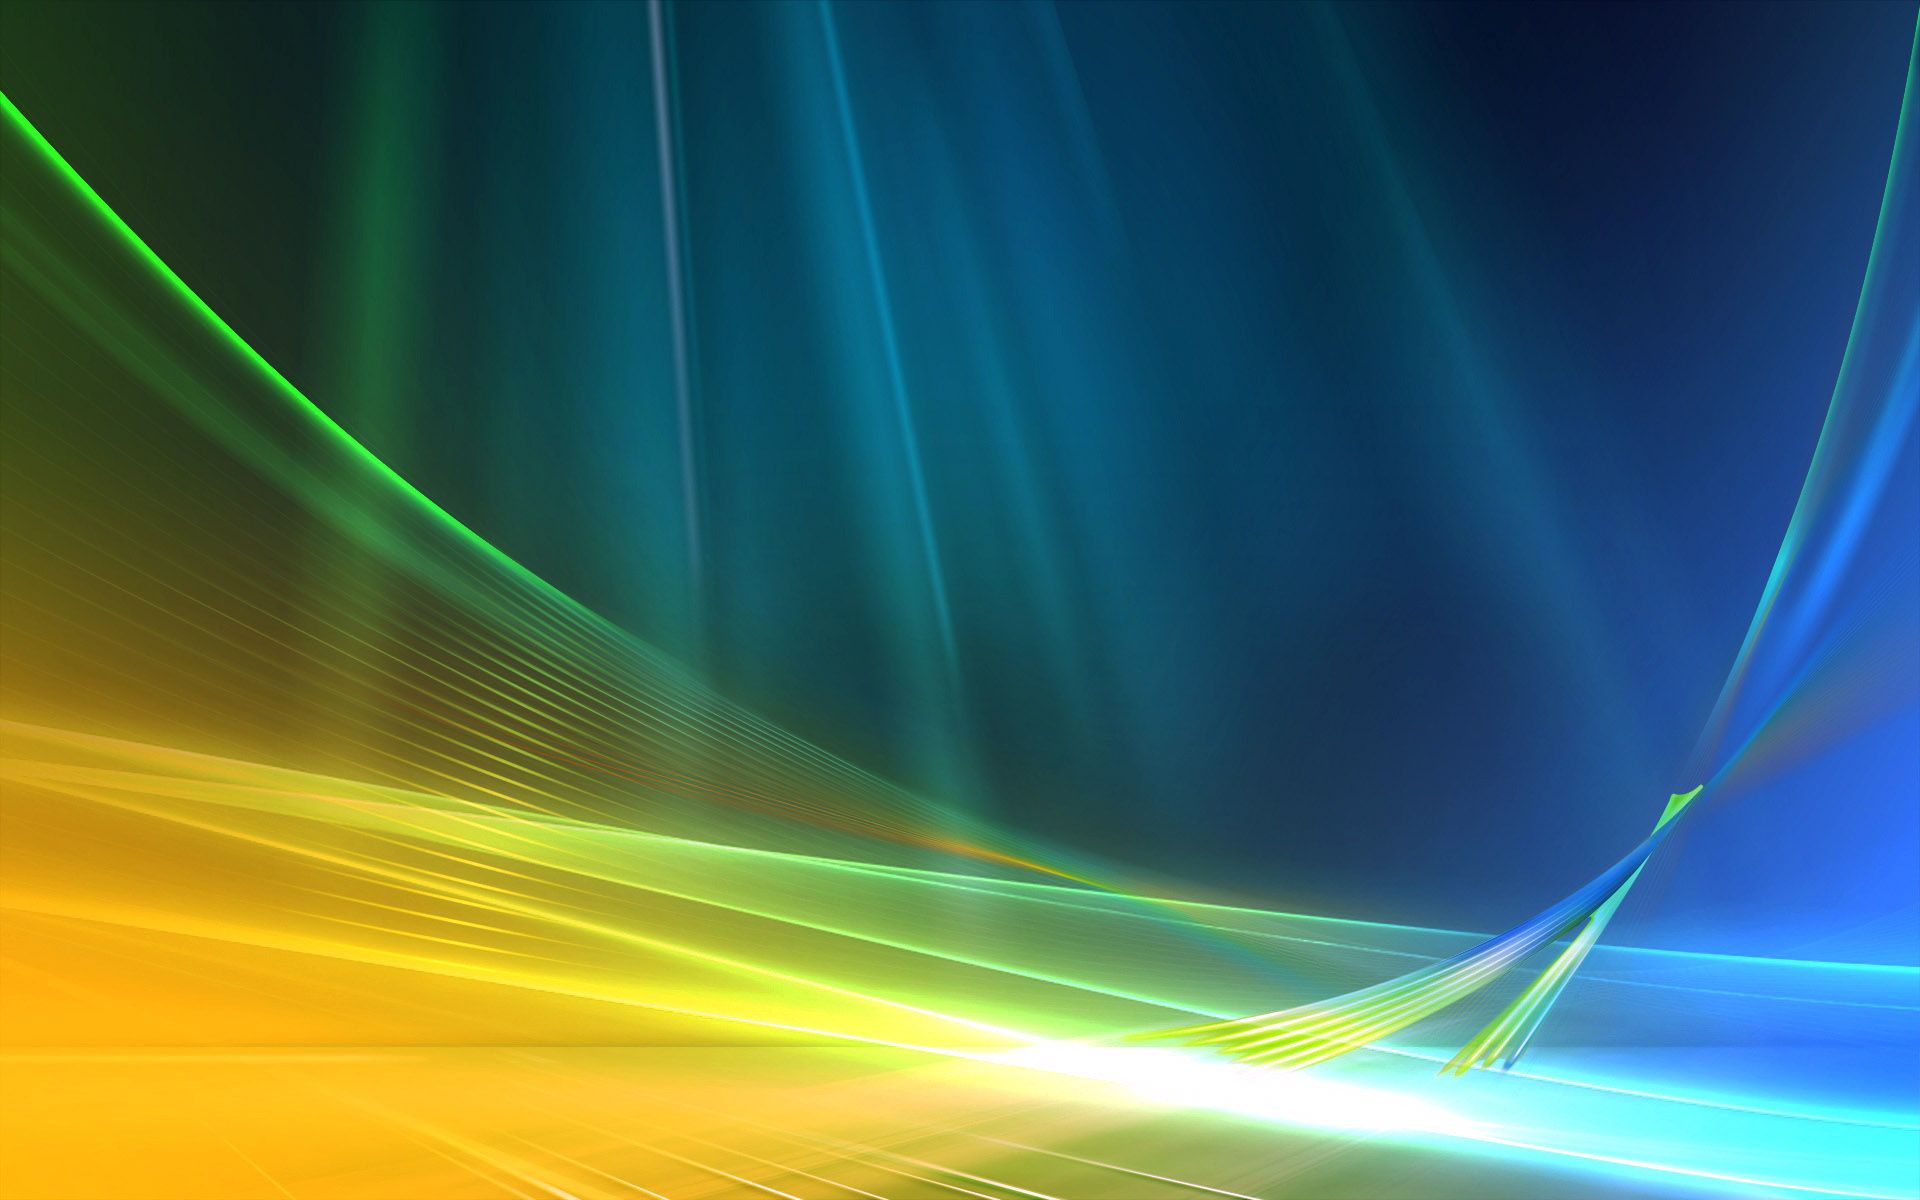 HD wallpaper, Abstract, And, Blue, Yellow